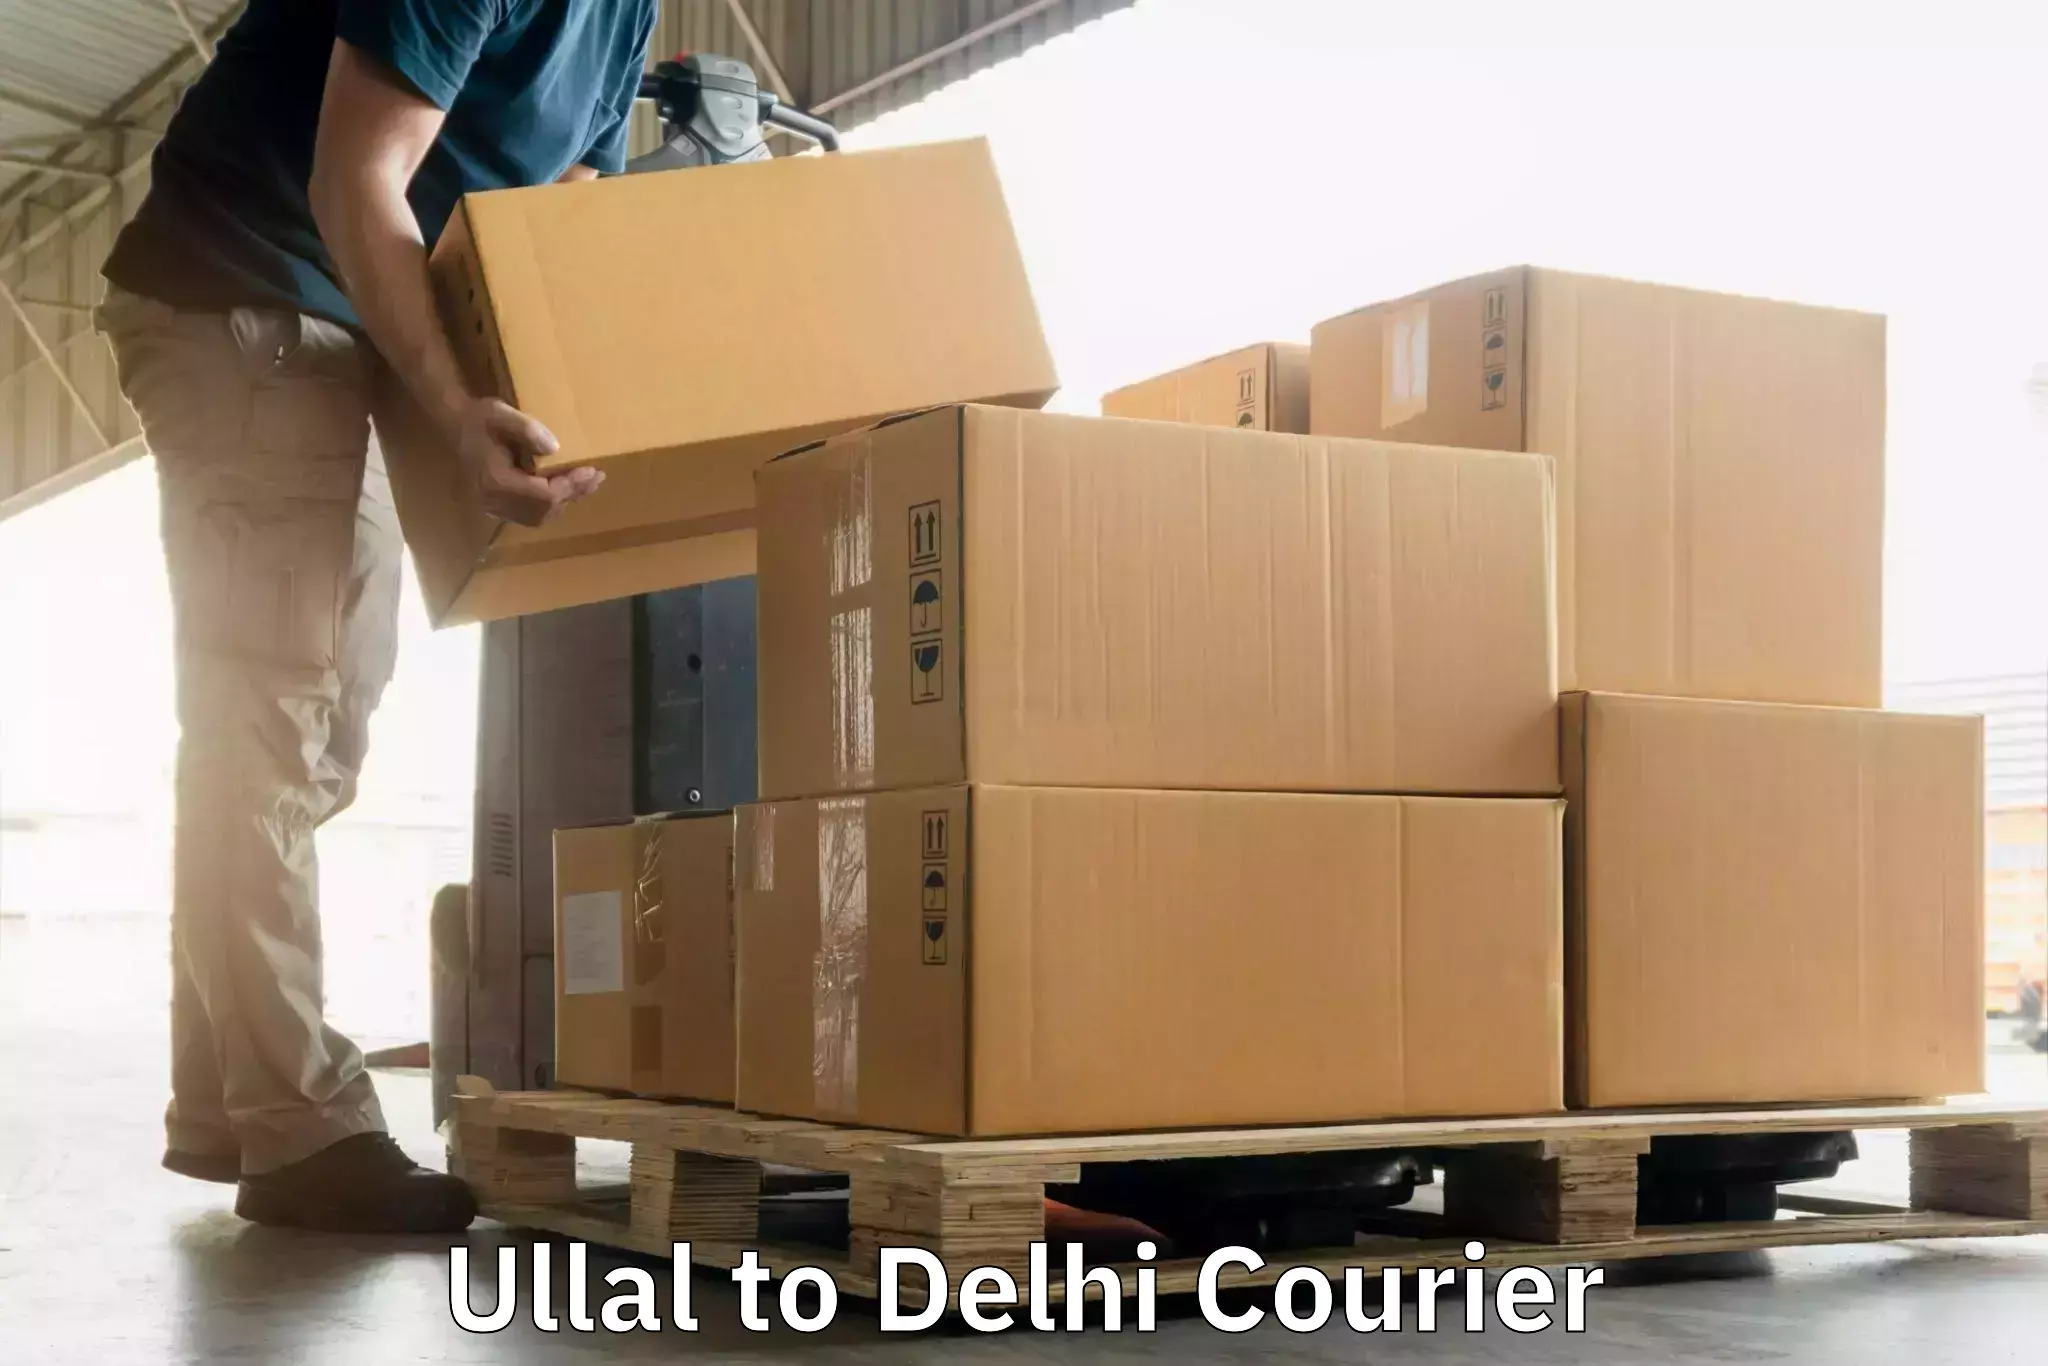 Flexible delivery scheduling Ullal to Lodhi Road